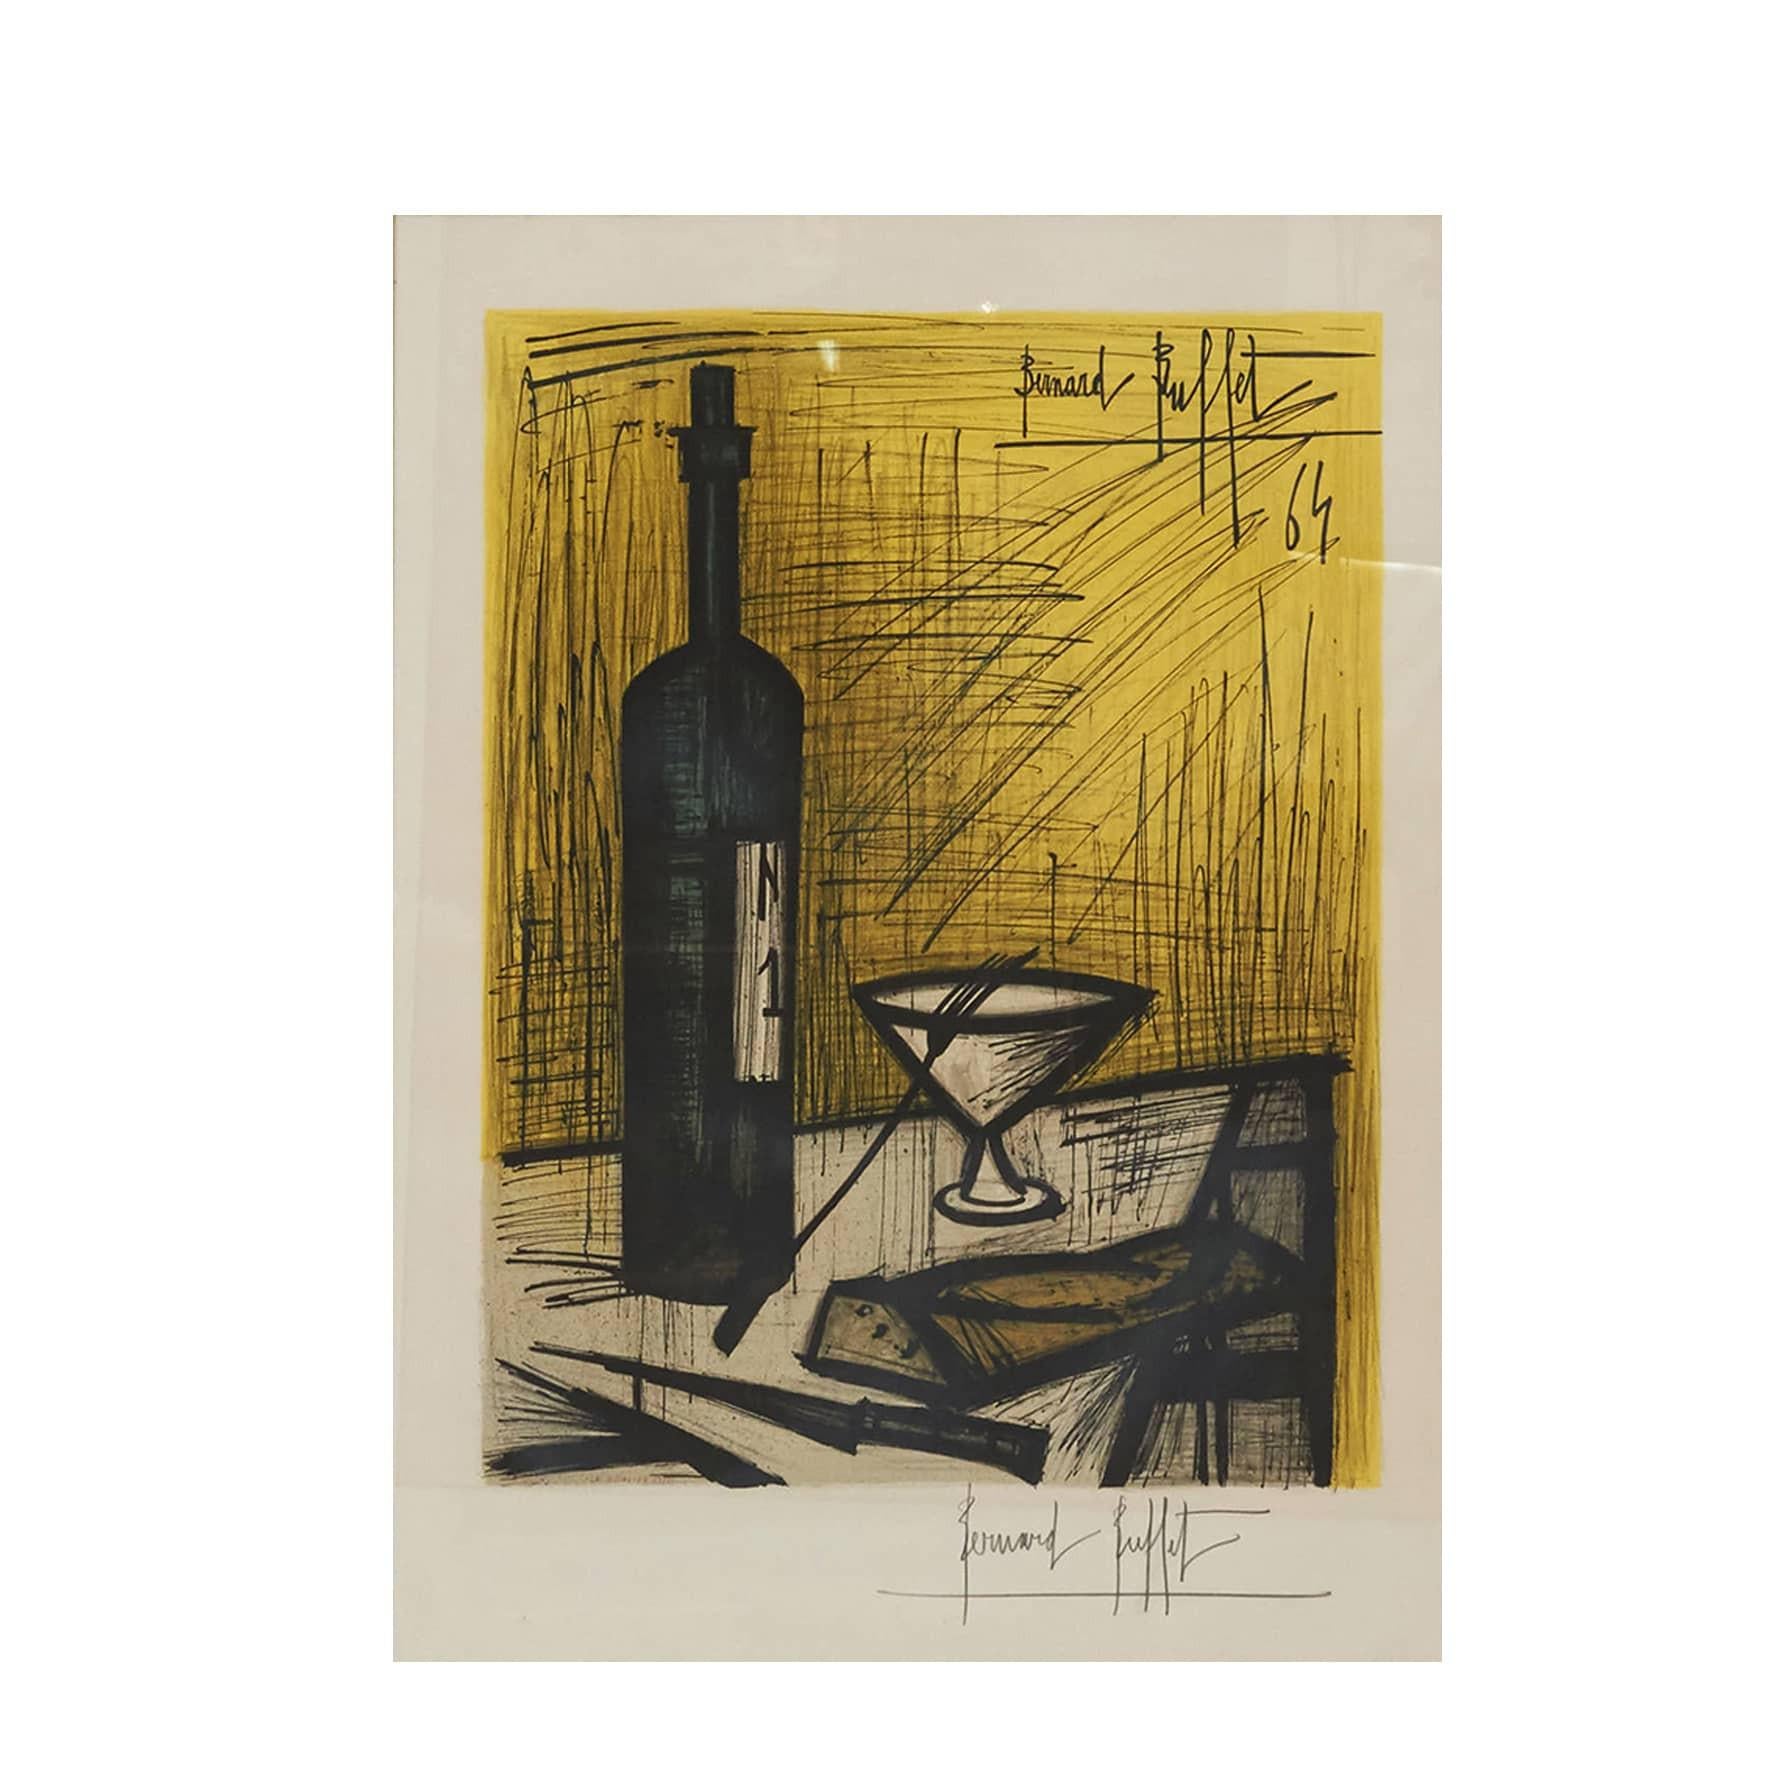 Bernard Buffet 1928-1999.
French lithograph: Nature morte à la bouteille (Still-Life with Bottle). Signed Bernard Buffet. 64.

Framed in a Mogens Koch Oregon pine frame made by Rud. Rasmussen Cabinetmakers with paper label.

Measurement (cm)